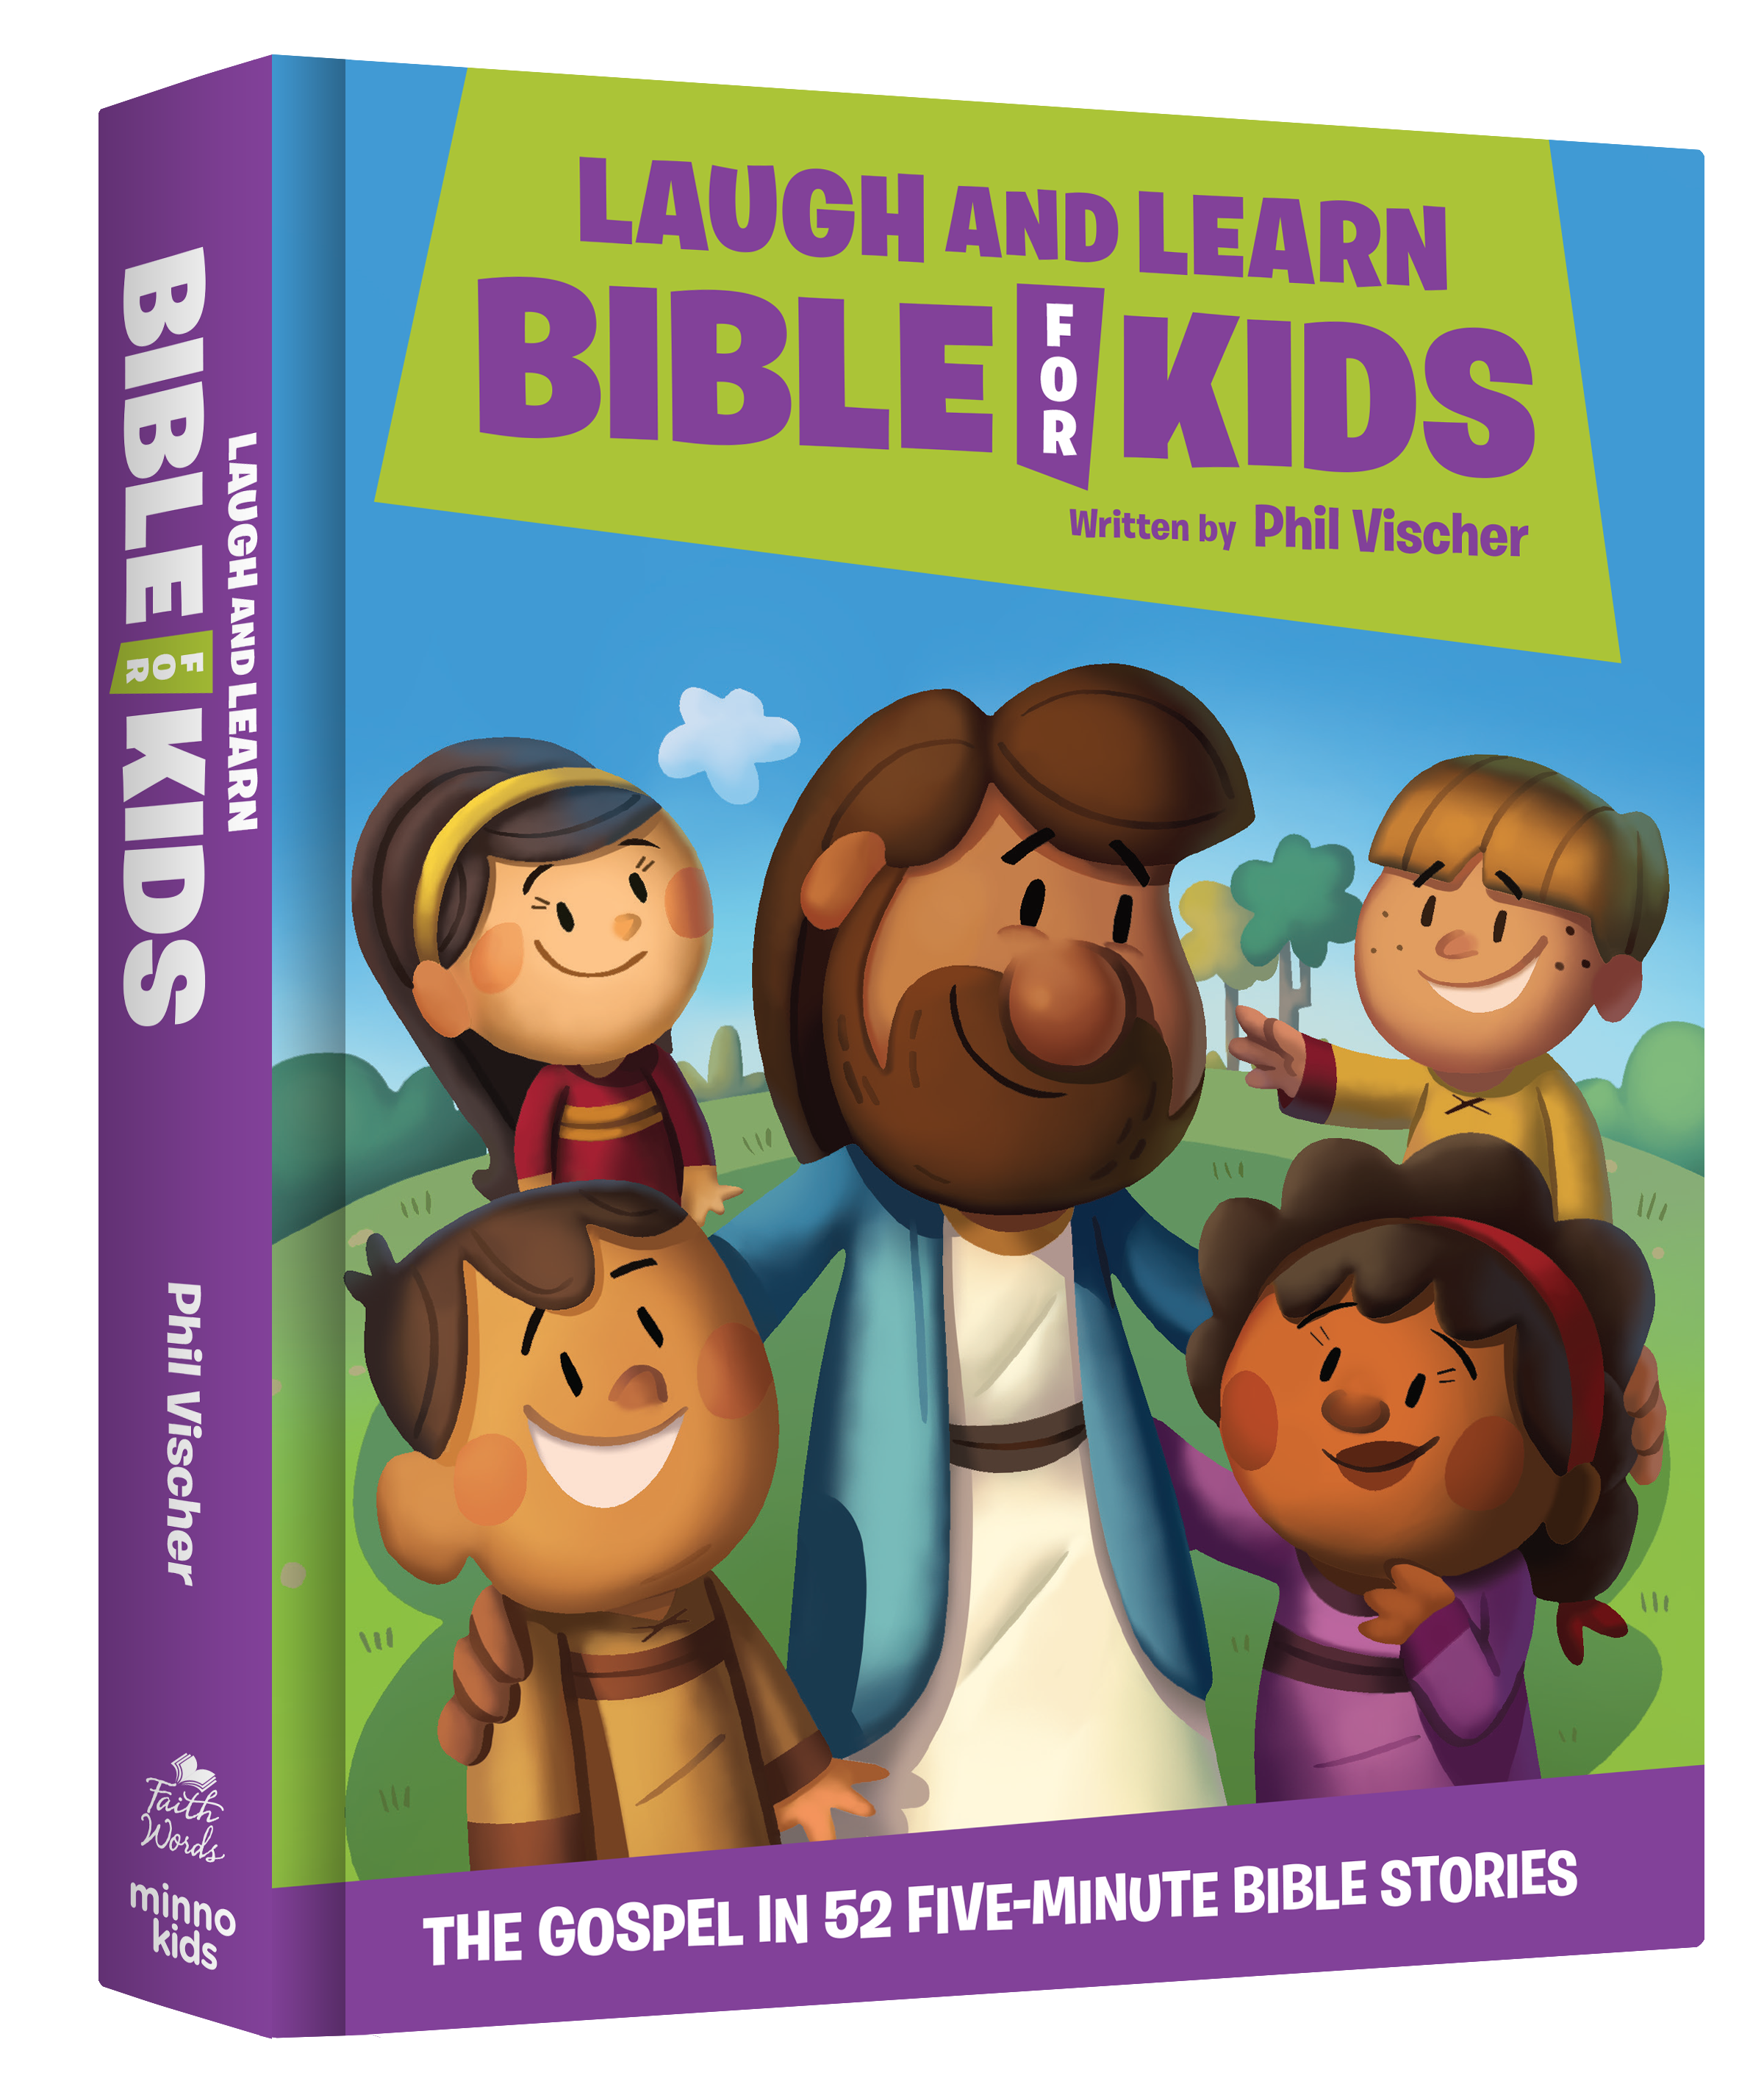 Laugh and Learn Bible for Kids.png